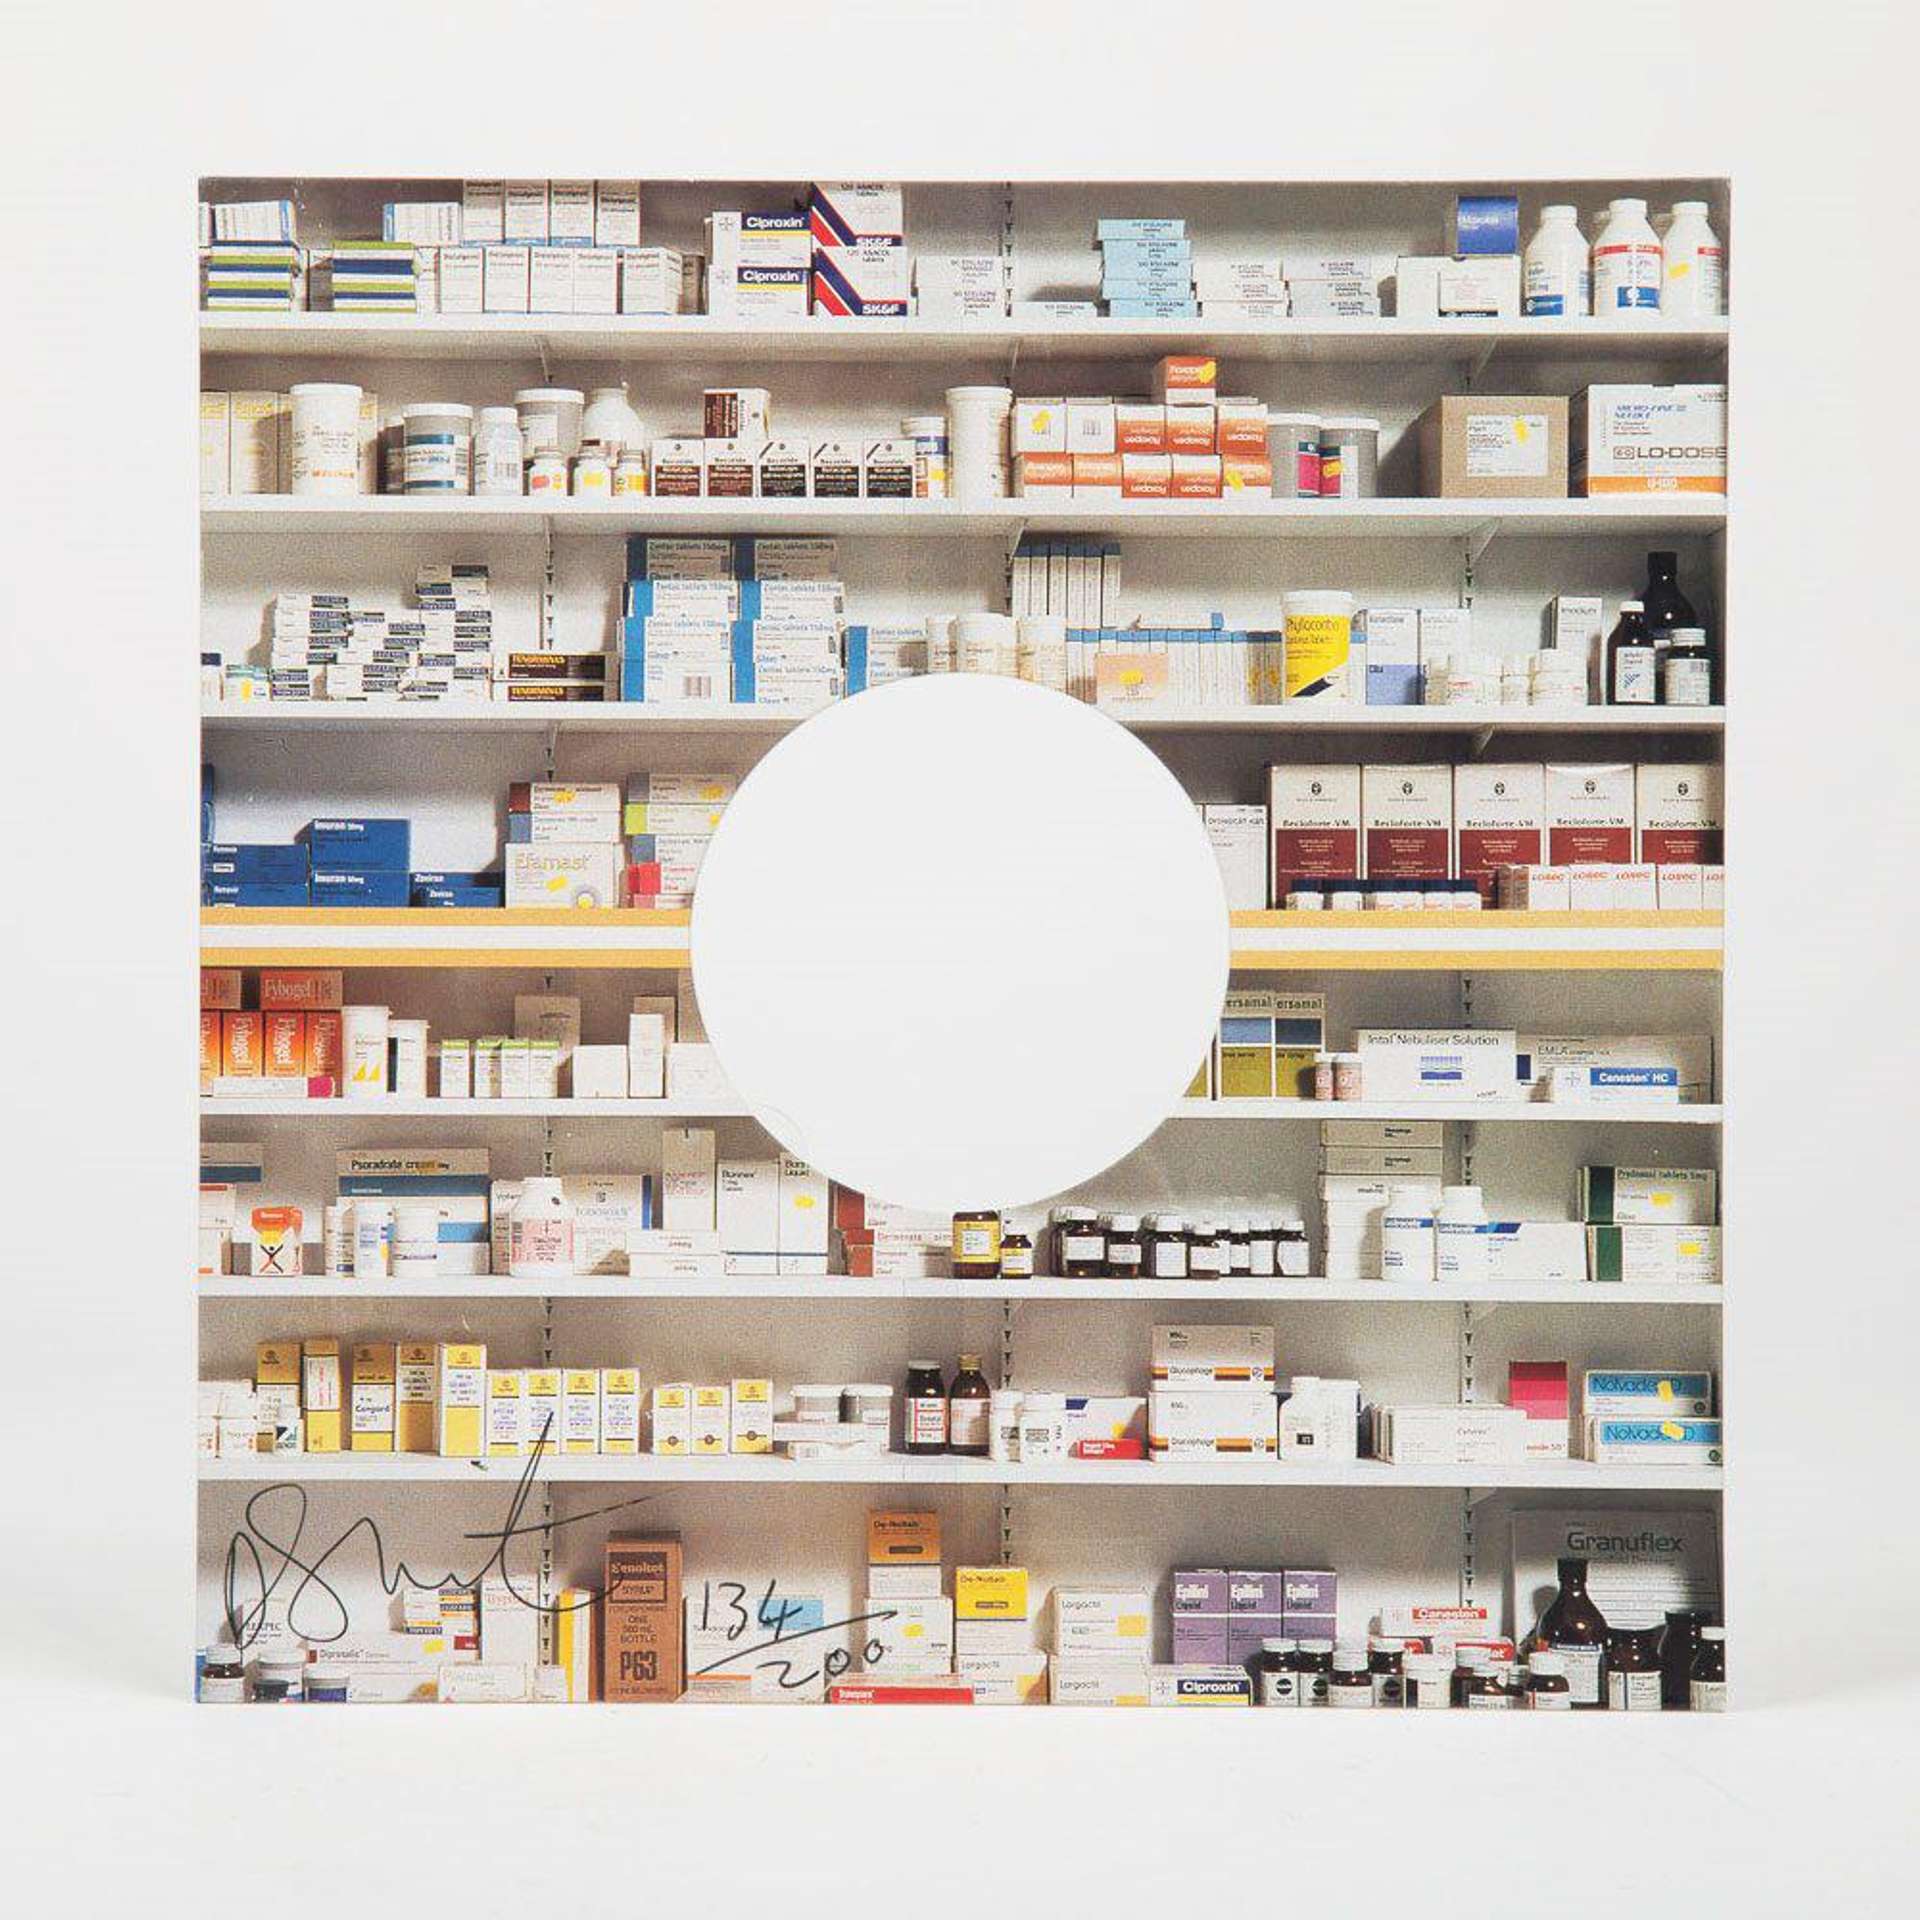 A photograph of Hirst’s Pharmacy, a true to life sized installation of a pharmacy, using materials like shelved cabinets and objects representing pharmaceutical drugs. The print has a white circle in the centre and is framed in white.